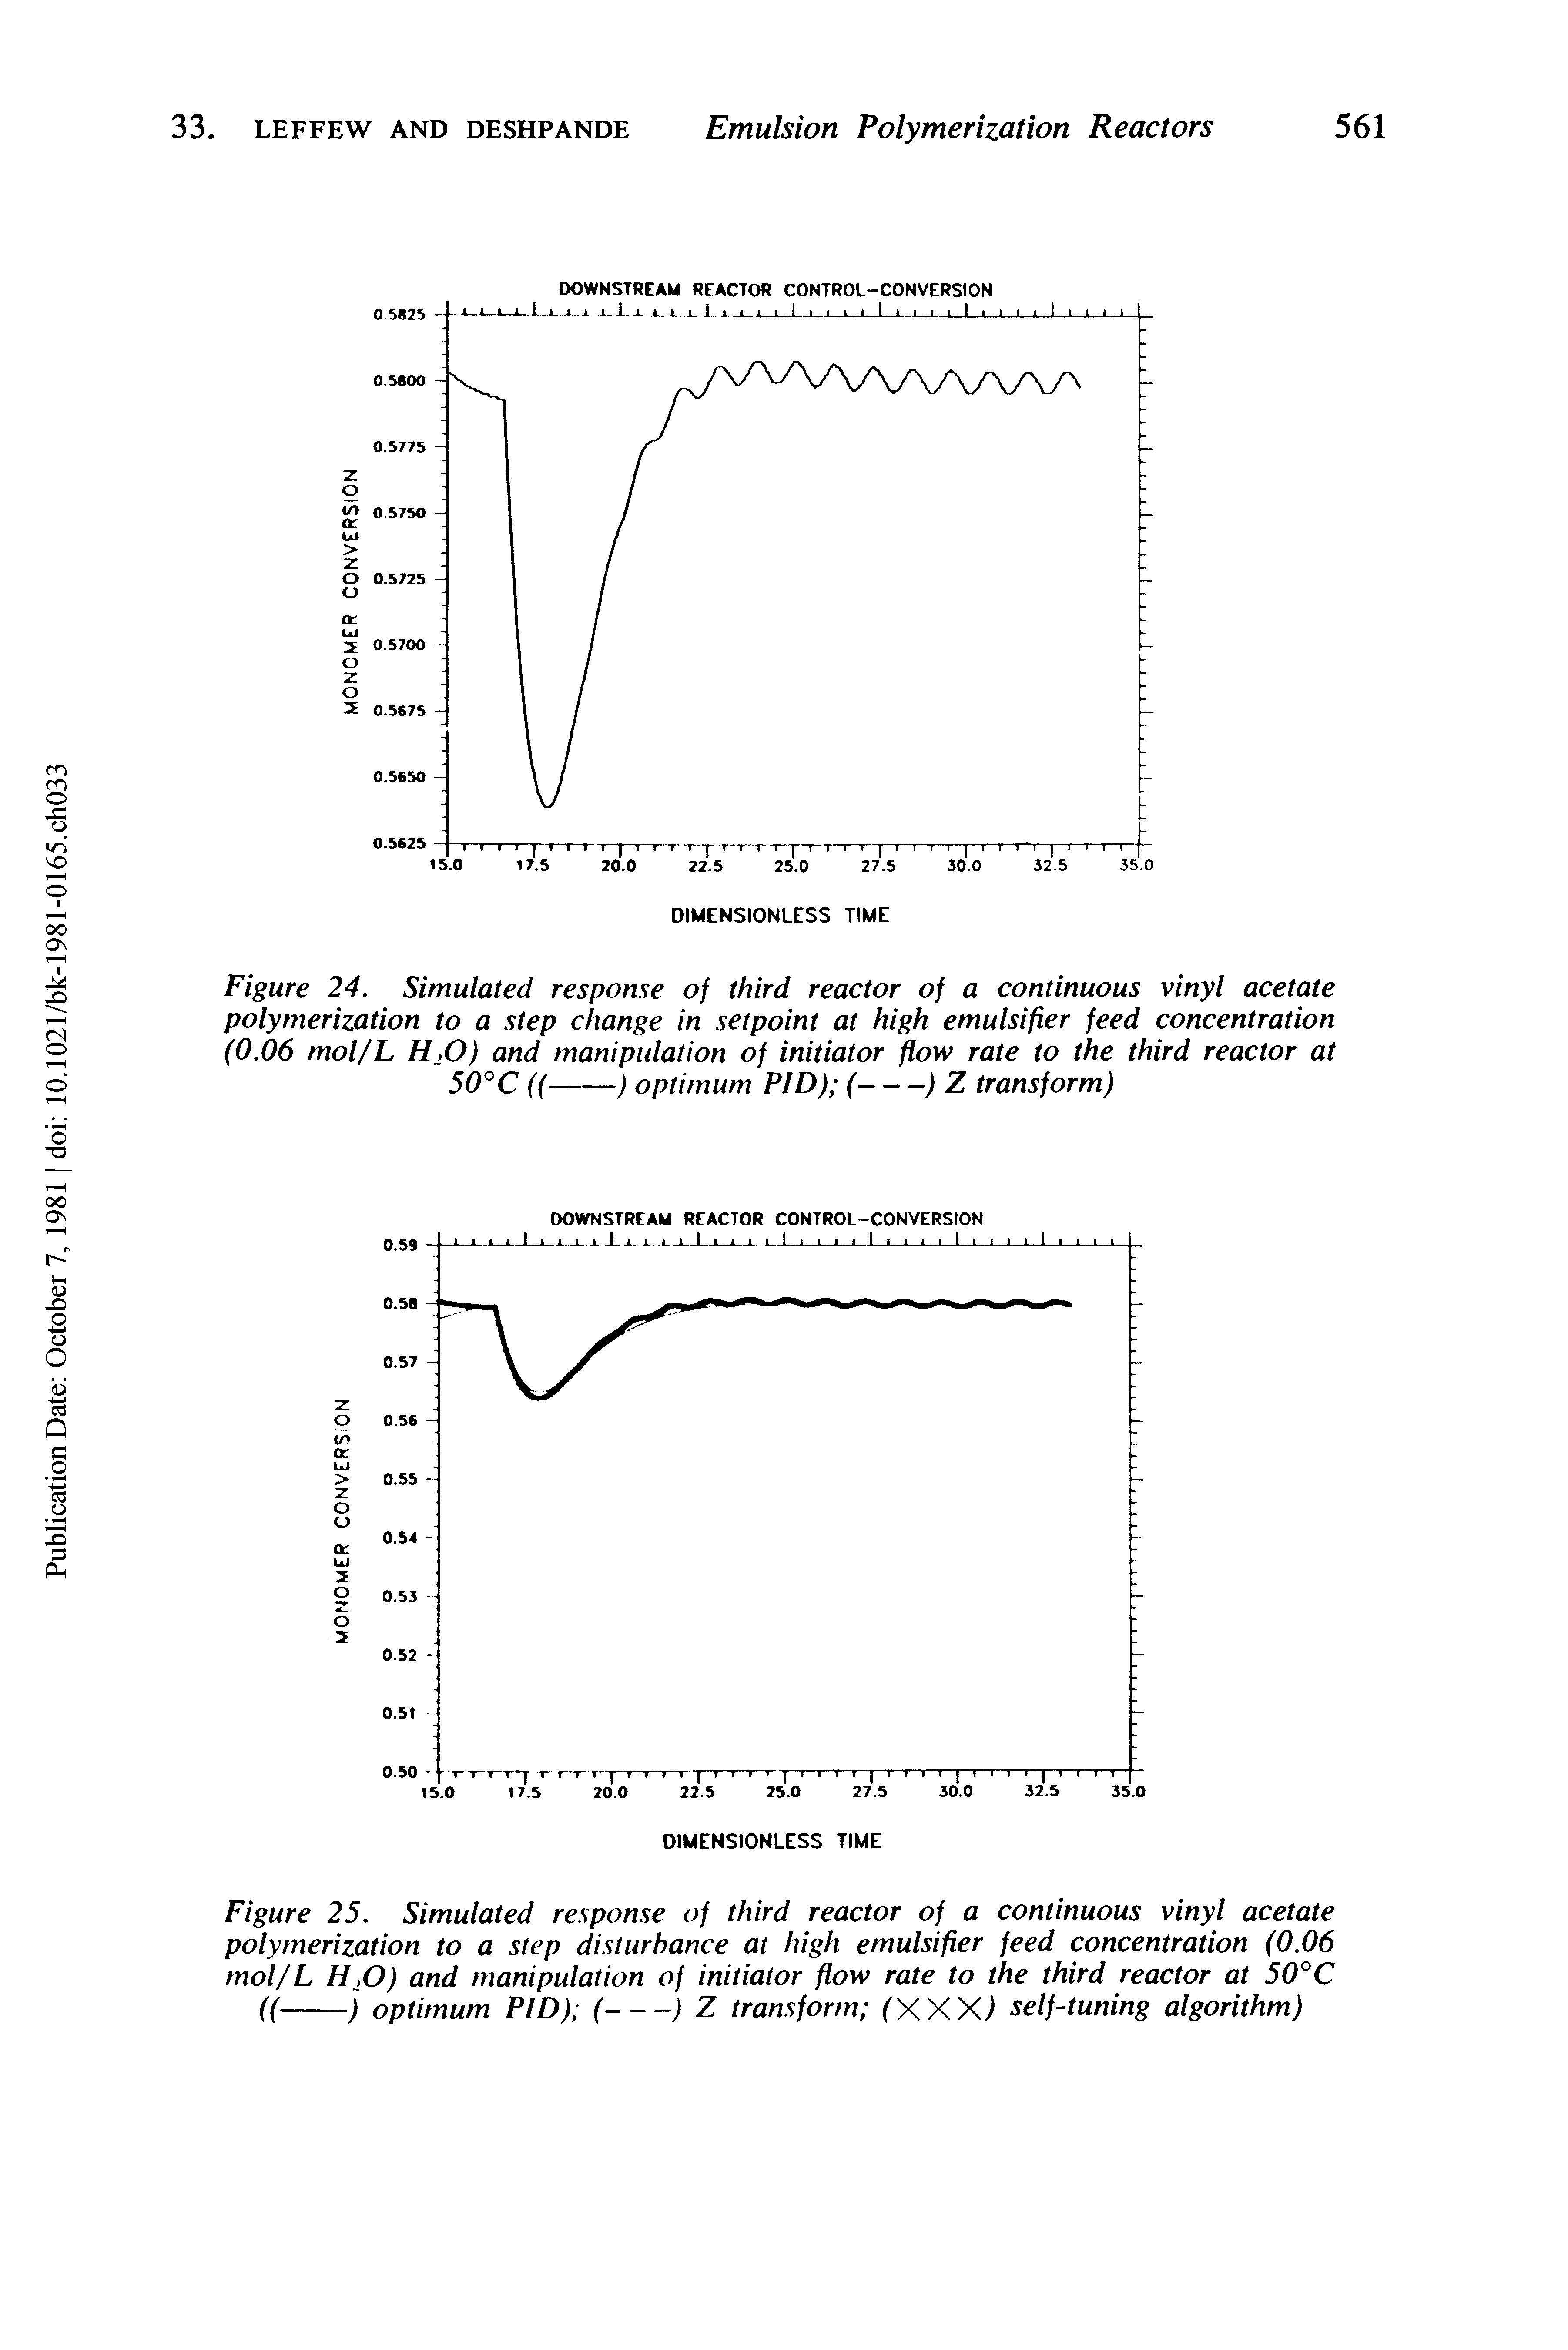 Figure 25. Simulated response of third reactor of a continuous vinyl acetate polymerization to a step disturbance at high emulsifier feed concentration (0.06 mol/L H,0) and manipulation of initiator flow rate to the third reactor at 50°C ((-------j optimum PID) (--------) Z transform (XXX) self-tuning algorithm)...